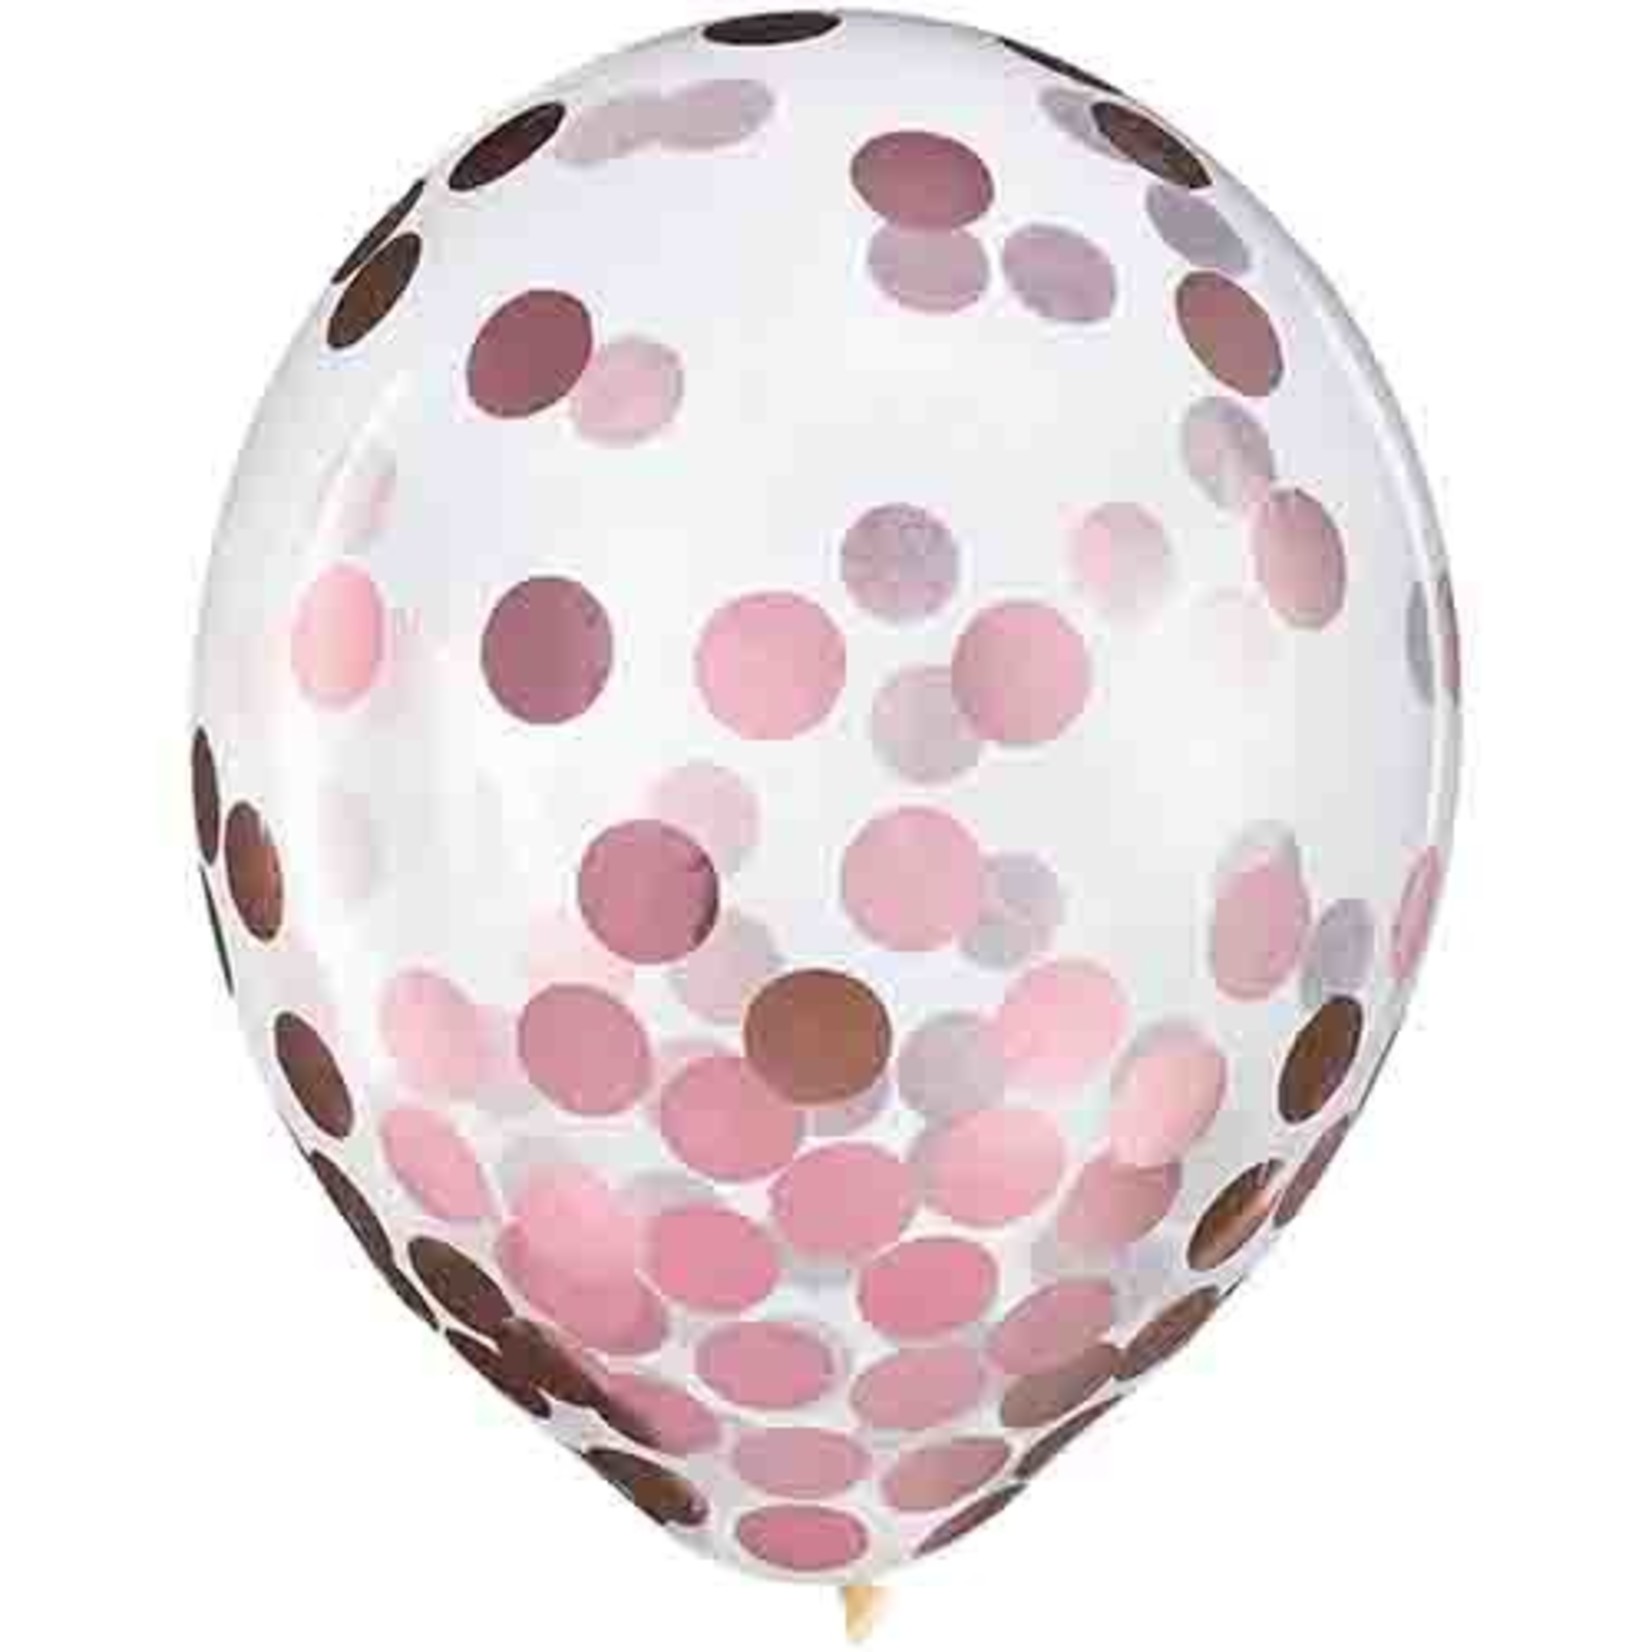 Amscan 12" Pink Confetti-Filled Latex Balloons - 6ct.